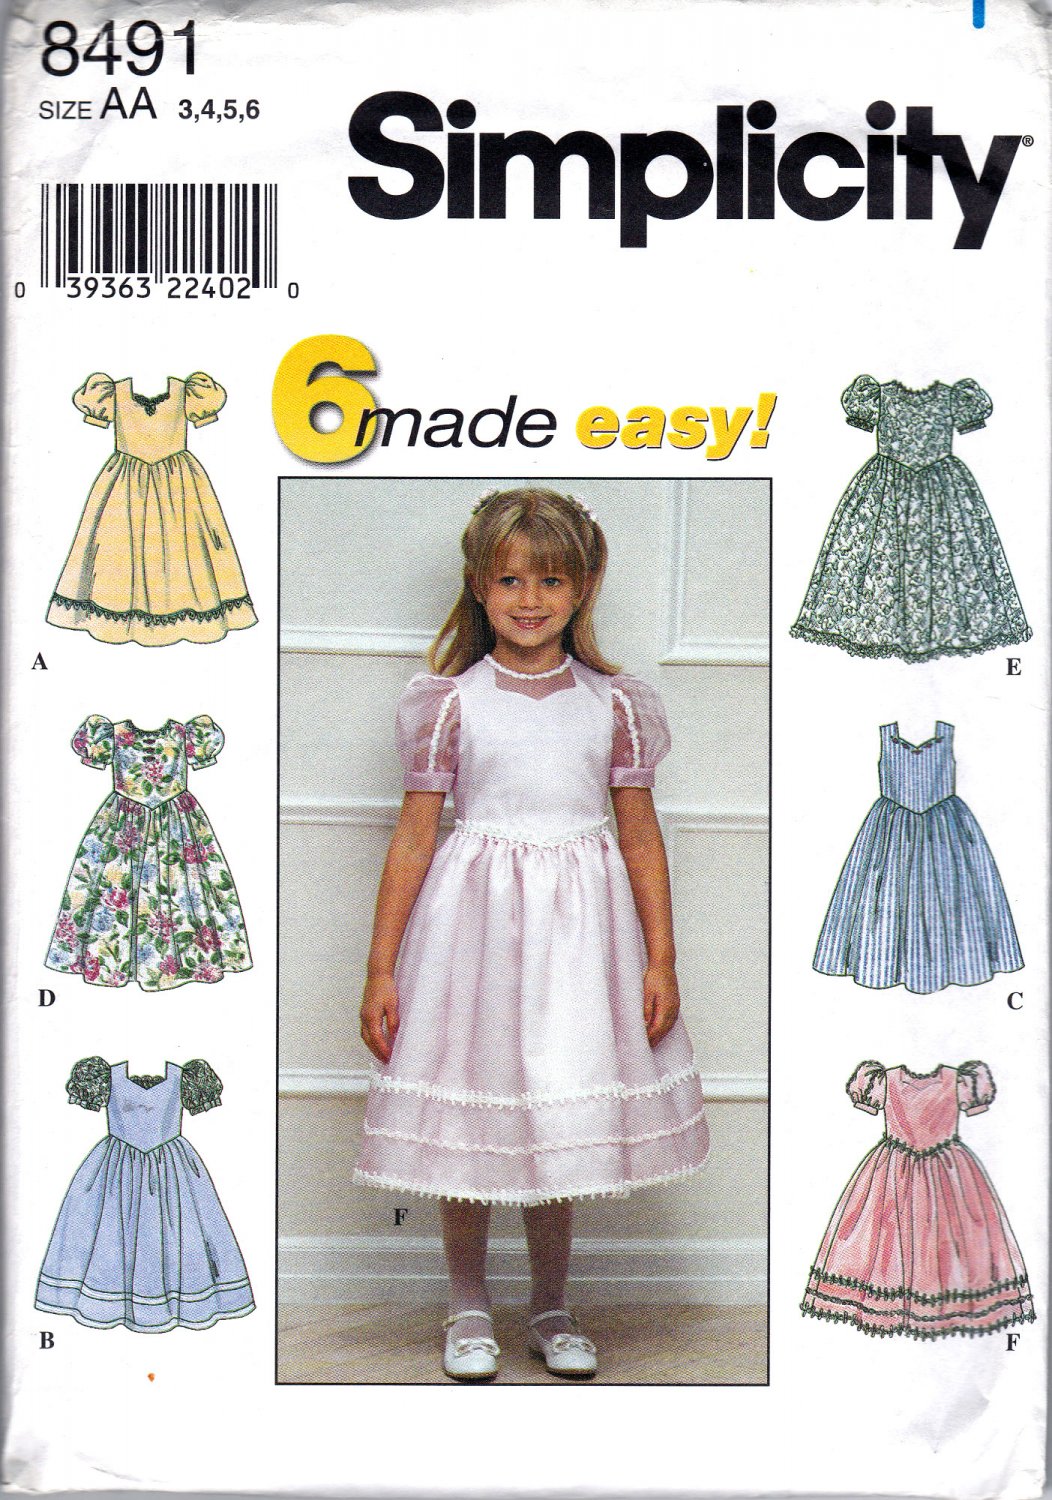 Simplicity 8491 Girls Sewing Pattern Childrens Dresses 6 Easy Patterns In One Kids Sizes 3-4-5-6